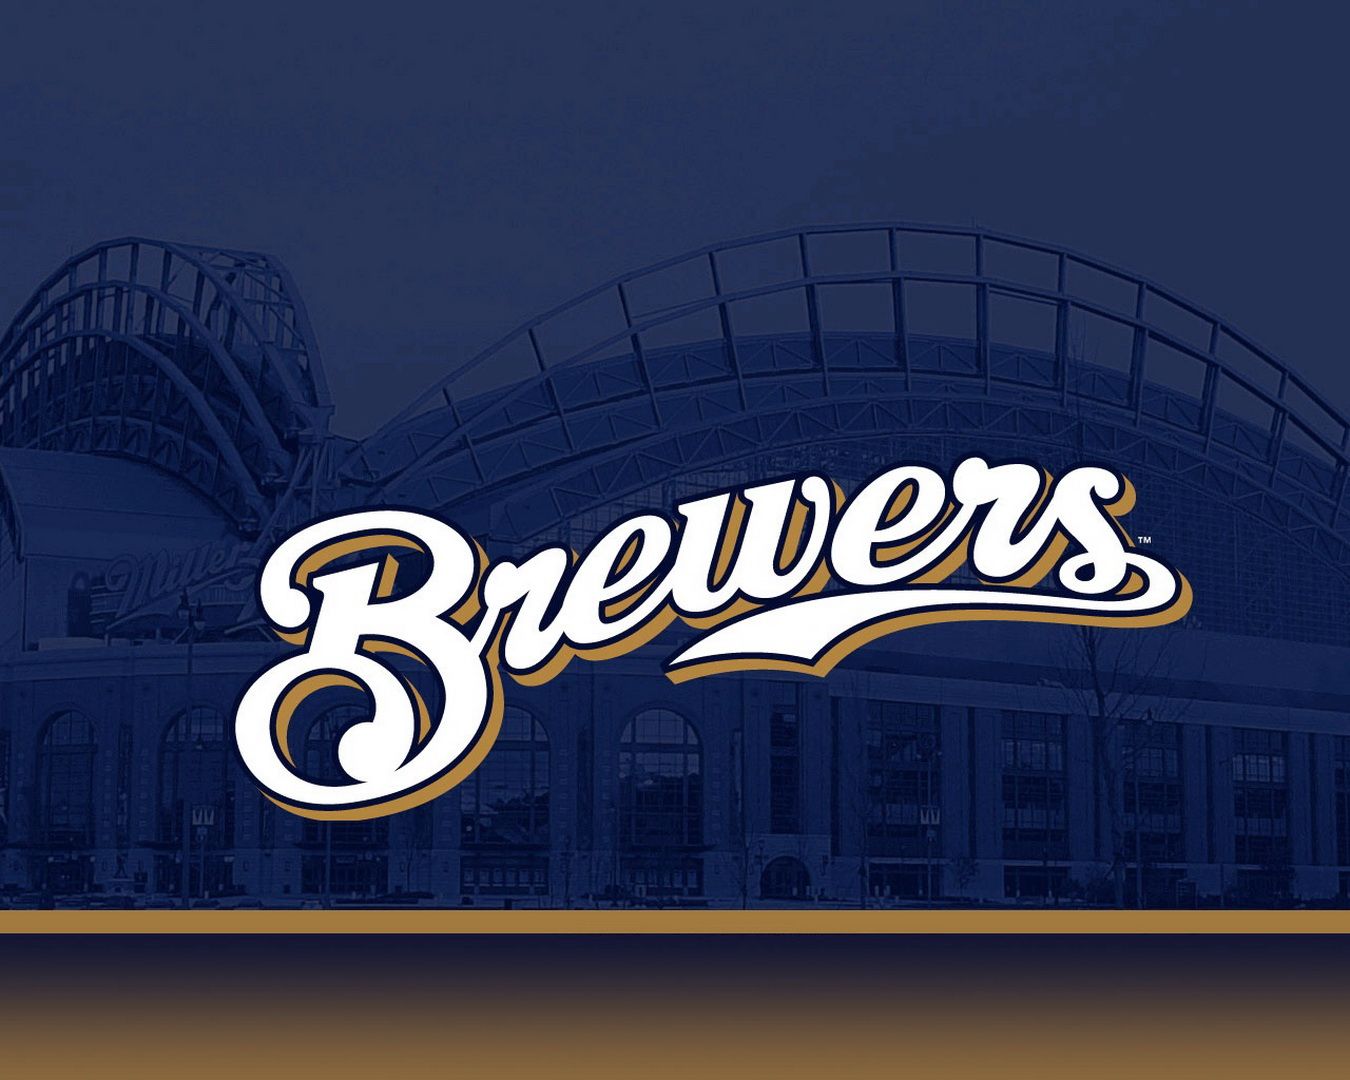 Brewers Background. Brewers Wallpaper, Brewers Background and Milwaukee Brewers Wallpaper